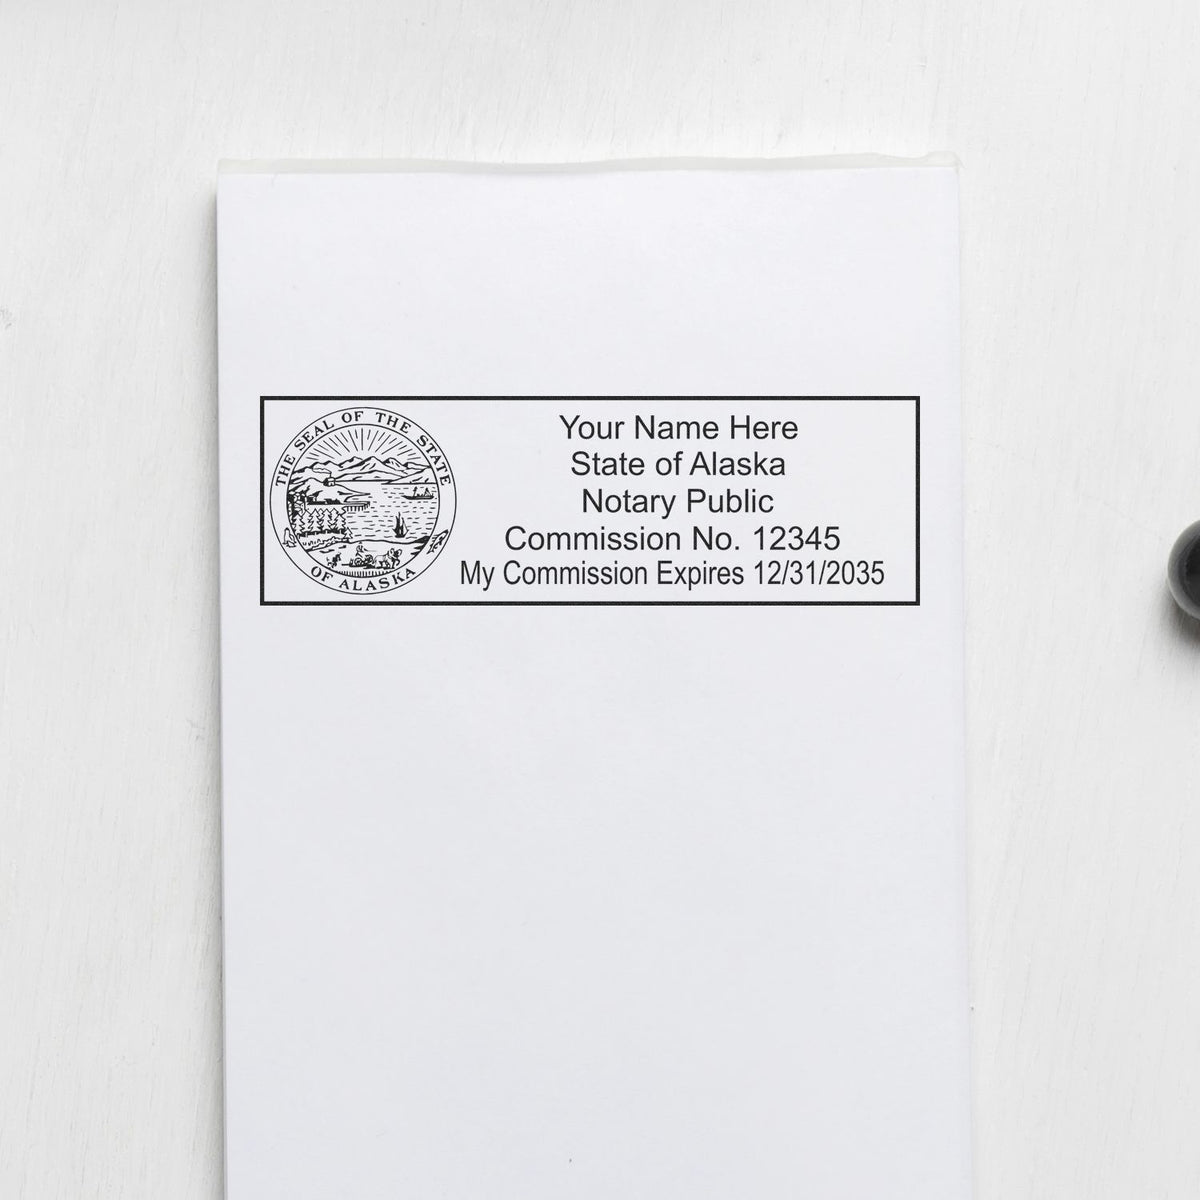 This paper is stamped with a sample imprint of the Super Slim Alaska Notary Public Stamp, signifying its quality and reliability.